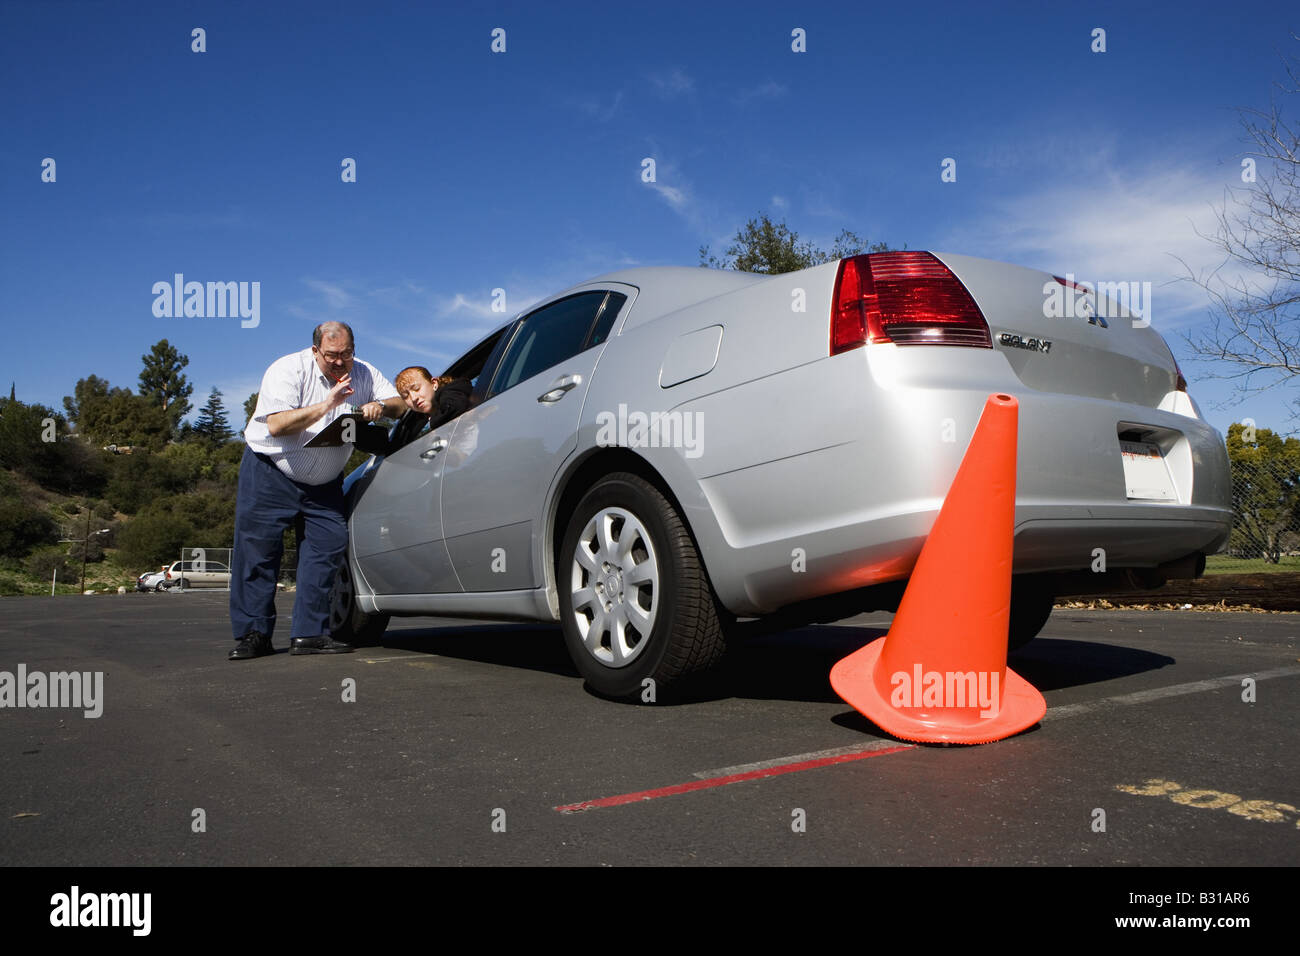 Driving instructor discusses knocked over orange cone with teen Stock Photo